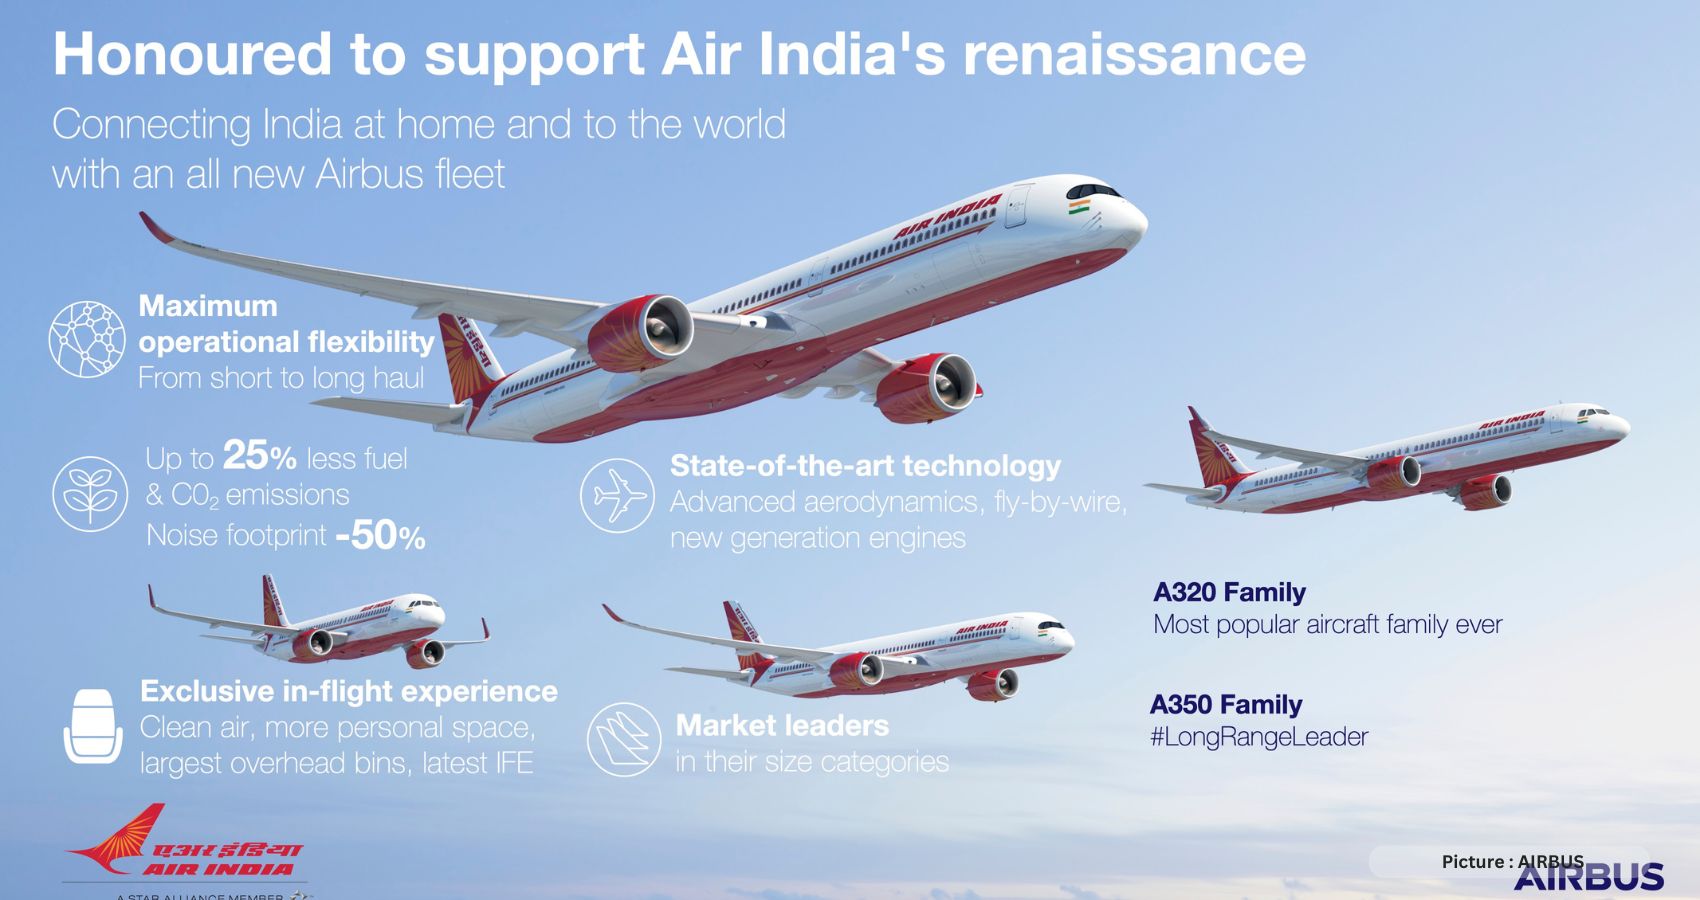 Air India Acquires 3 Brand New Aircrafts